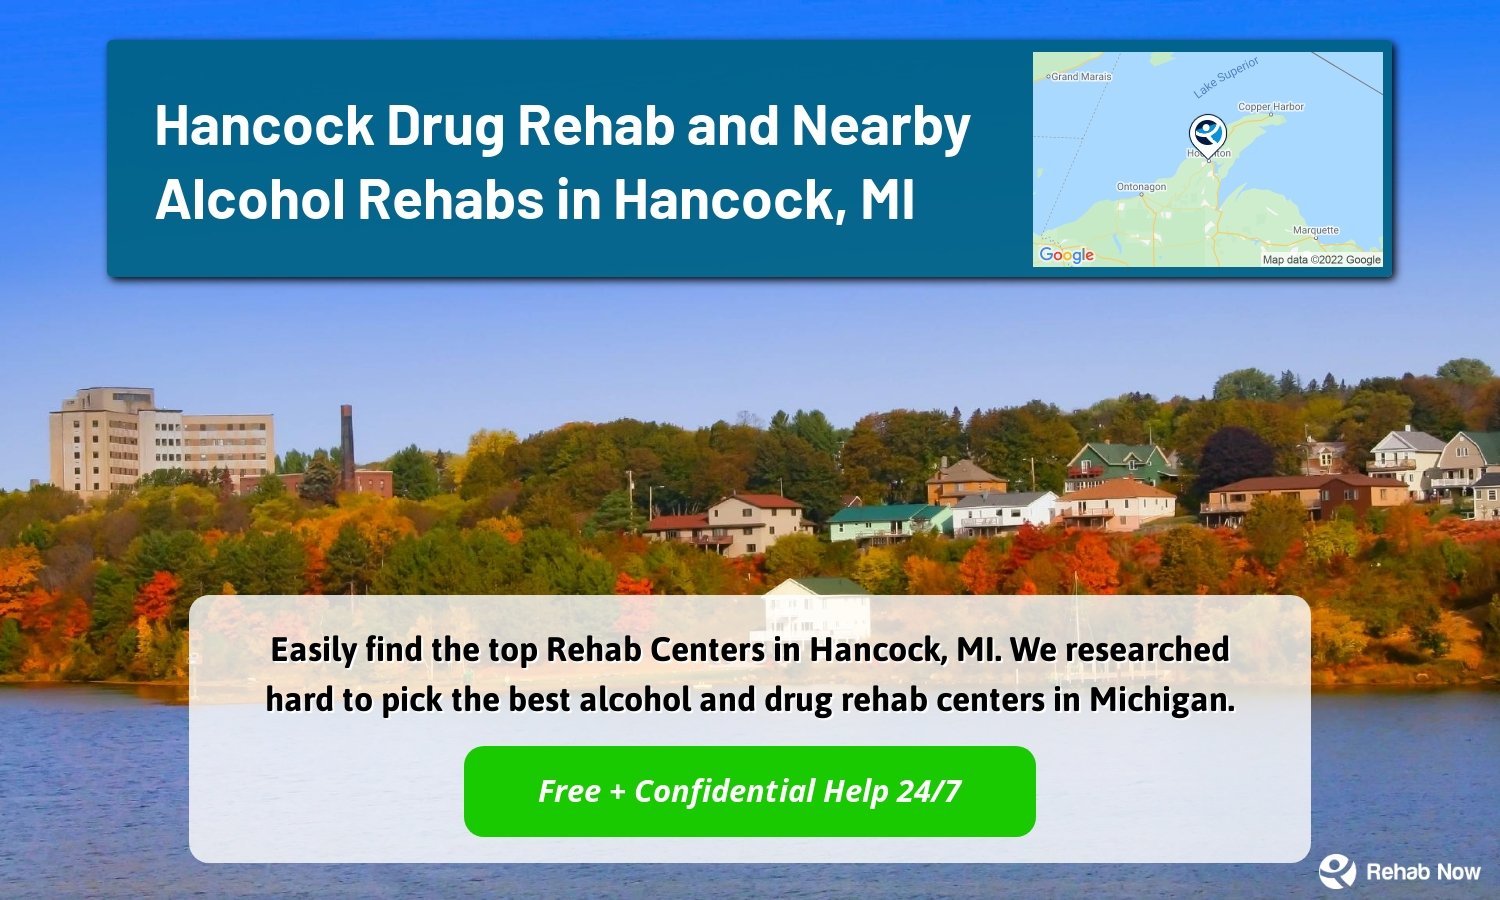 Easily find the top Rehab Centers in Hancock, MI. We researched hard to pick the best alcohol and drug rehab centers in Michigan.